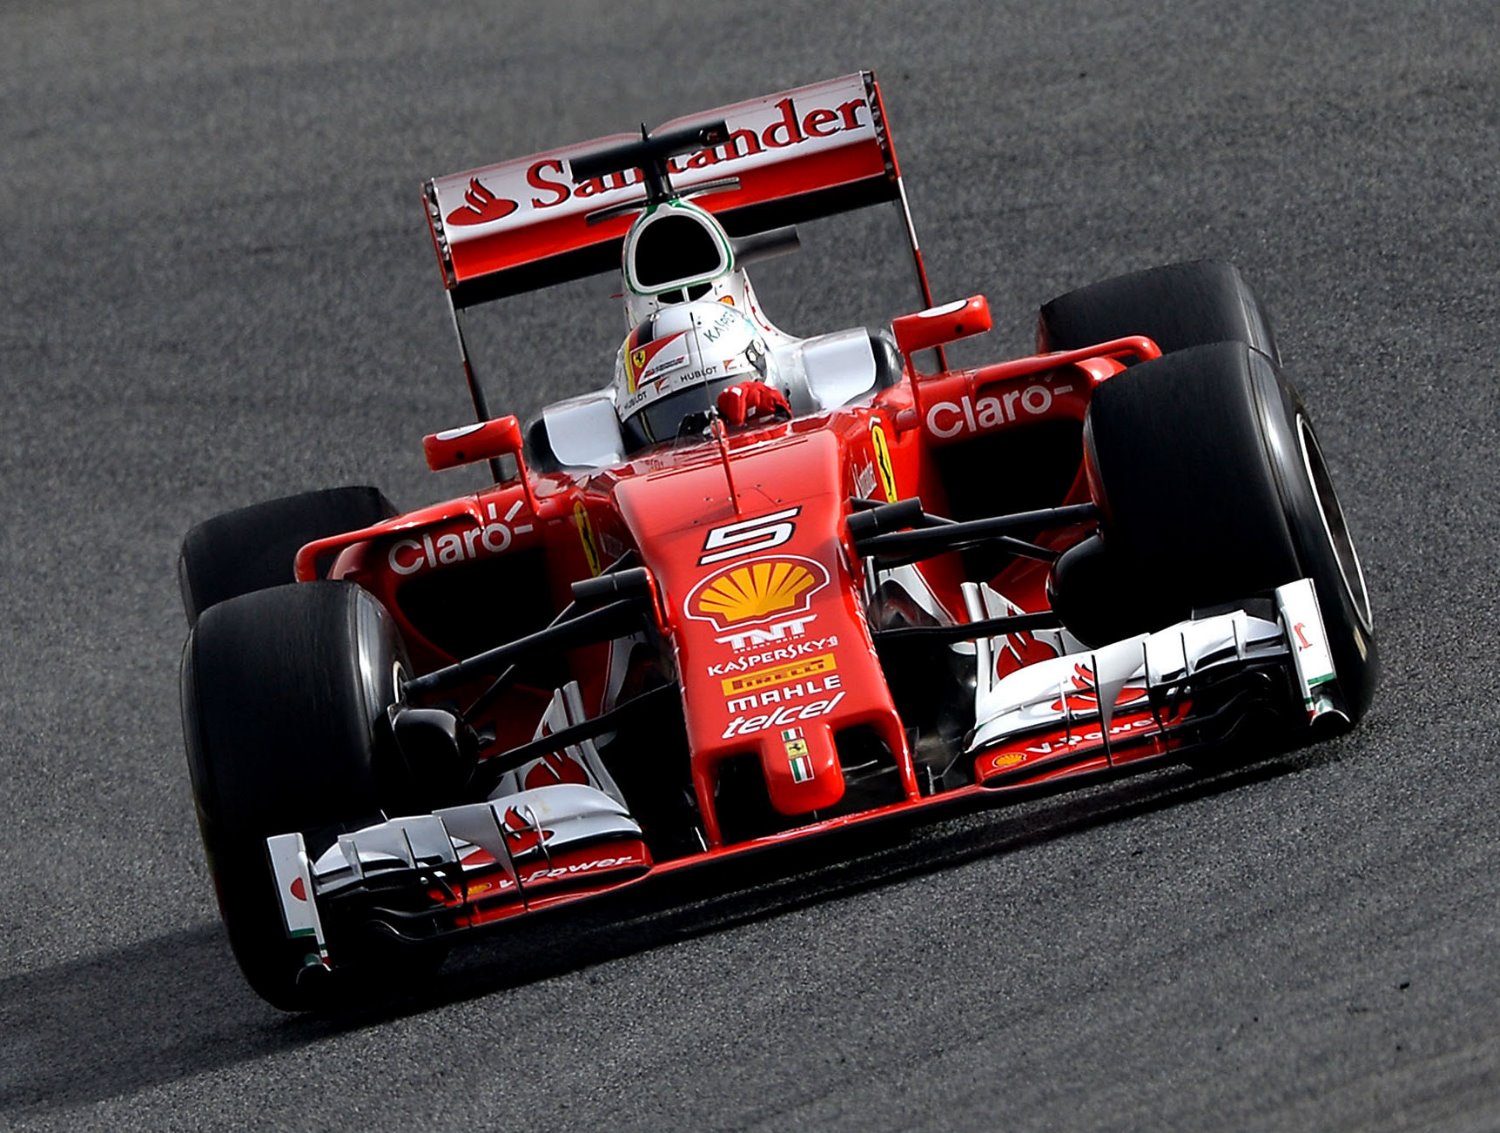 Vettel had the fastest lap on the Ulte-Softs but that was because Mercedes never ran the Softs or the Ultra-Softs